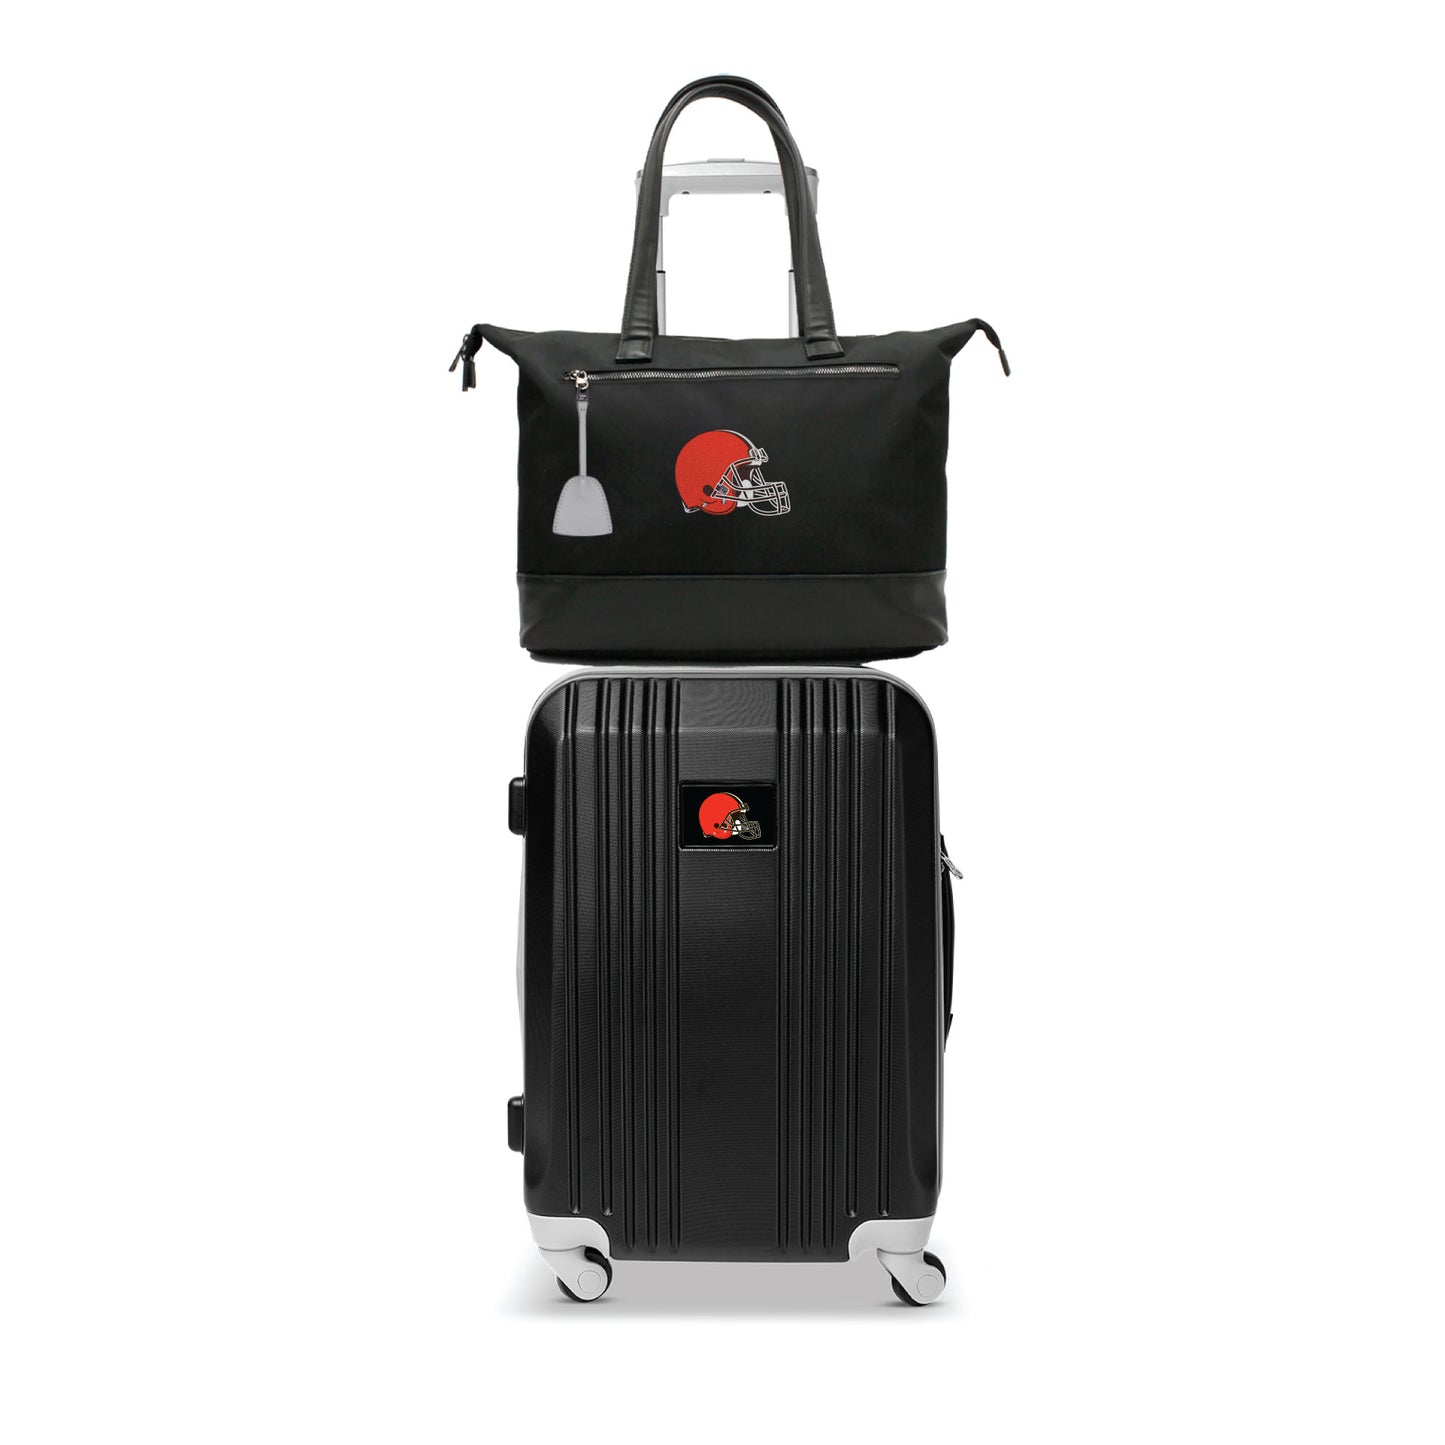 Cleveland Browns Premium Laptop Tote Bag and Luggage Set